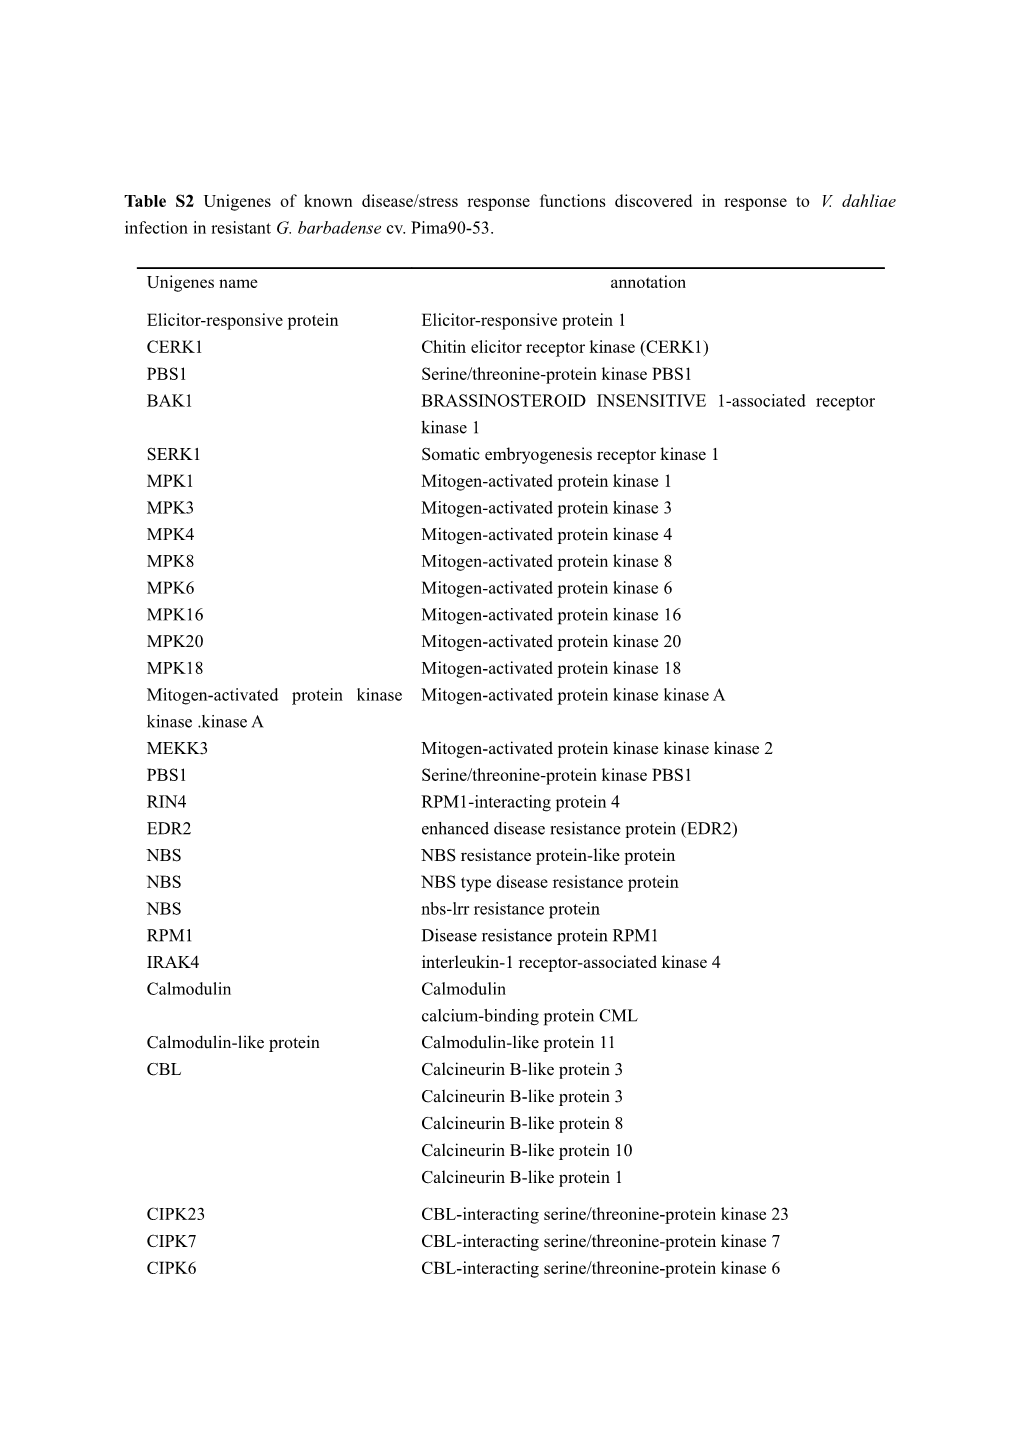 Table S2unigenes of Known Disease/Stress Response Functions Discovered in Response to V